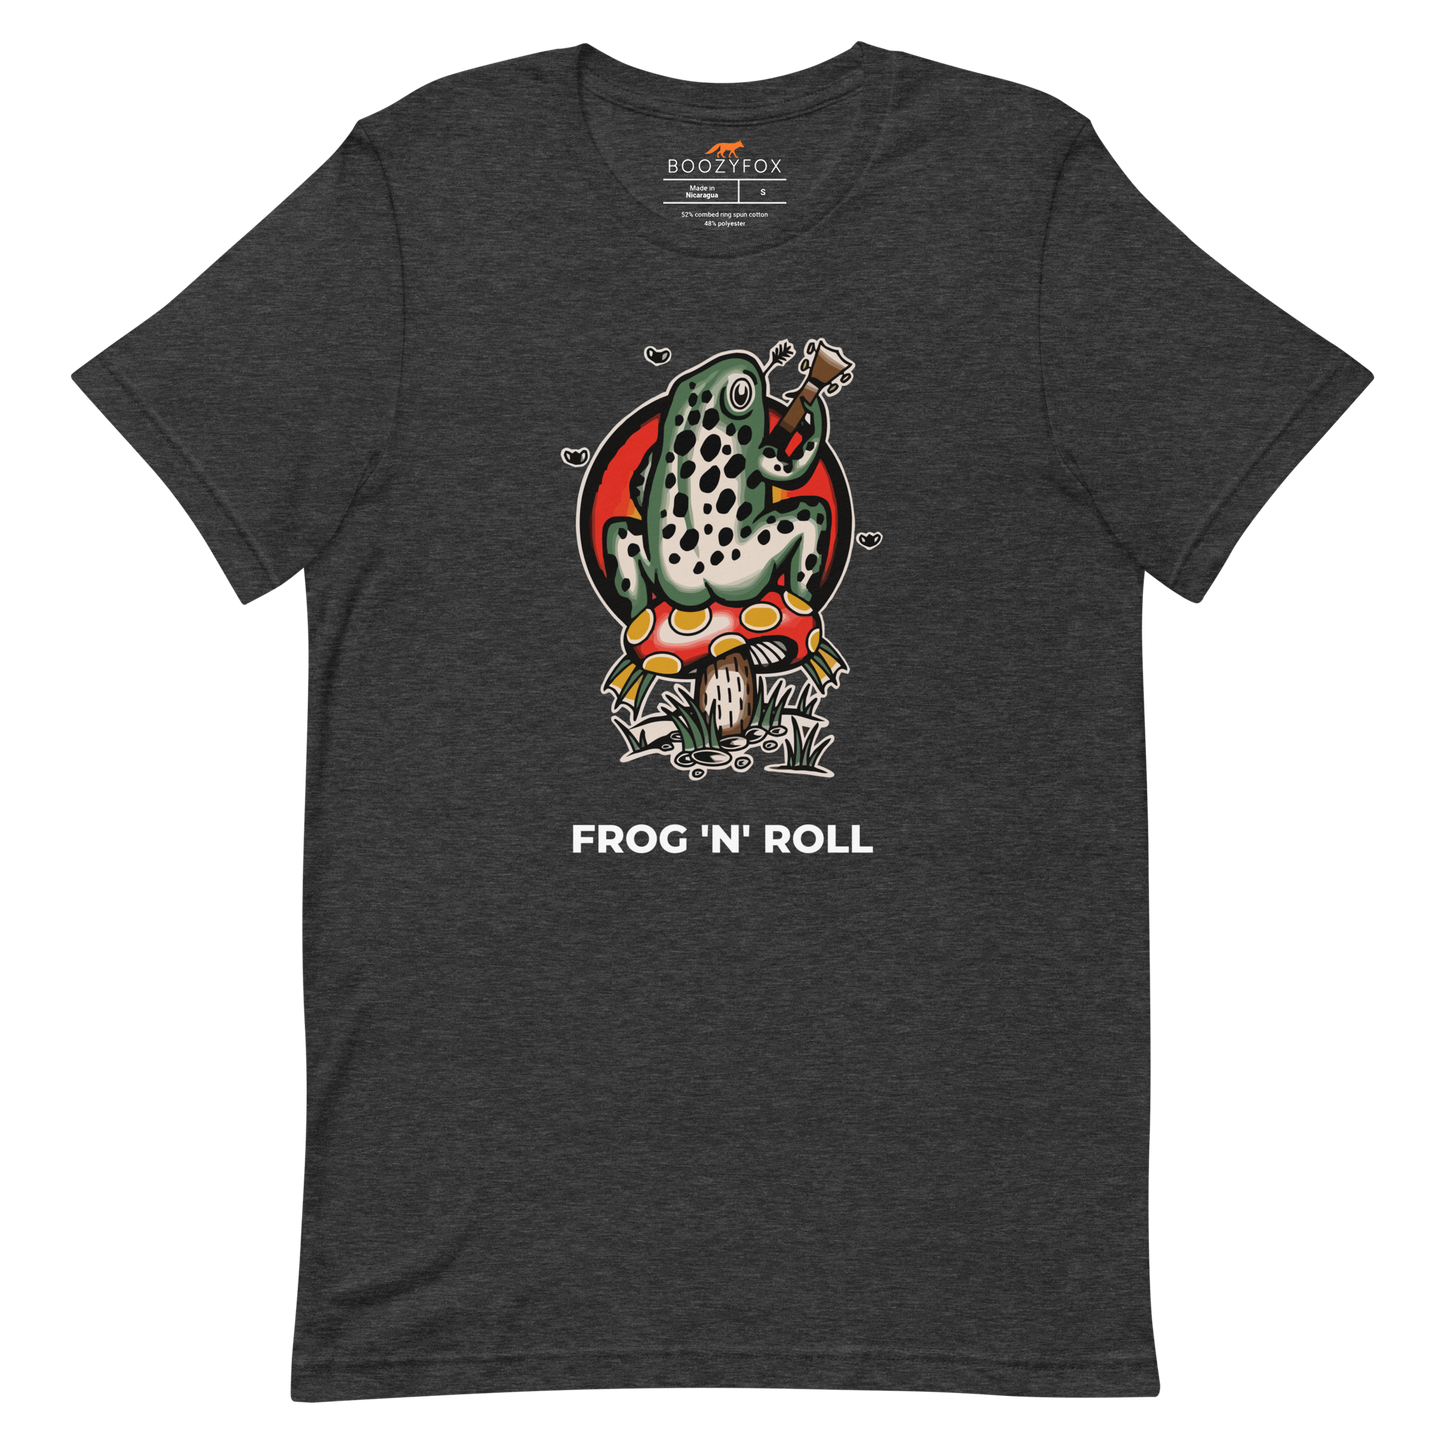 Dark Grey Heather Premium Frog Tee featuring a funny Frog 'n' Roll graphic on the chest - Funny Graphic Frog Tees - Boozy Fox